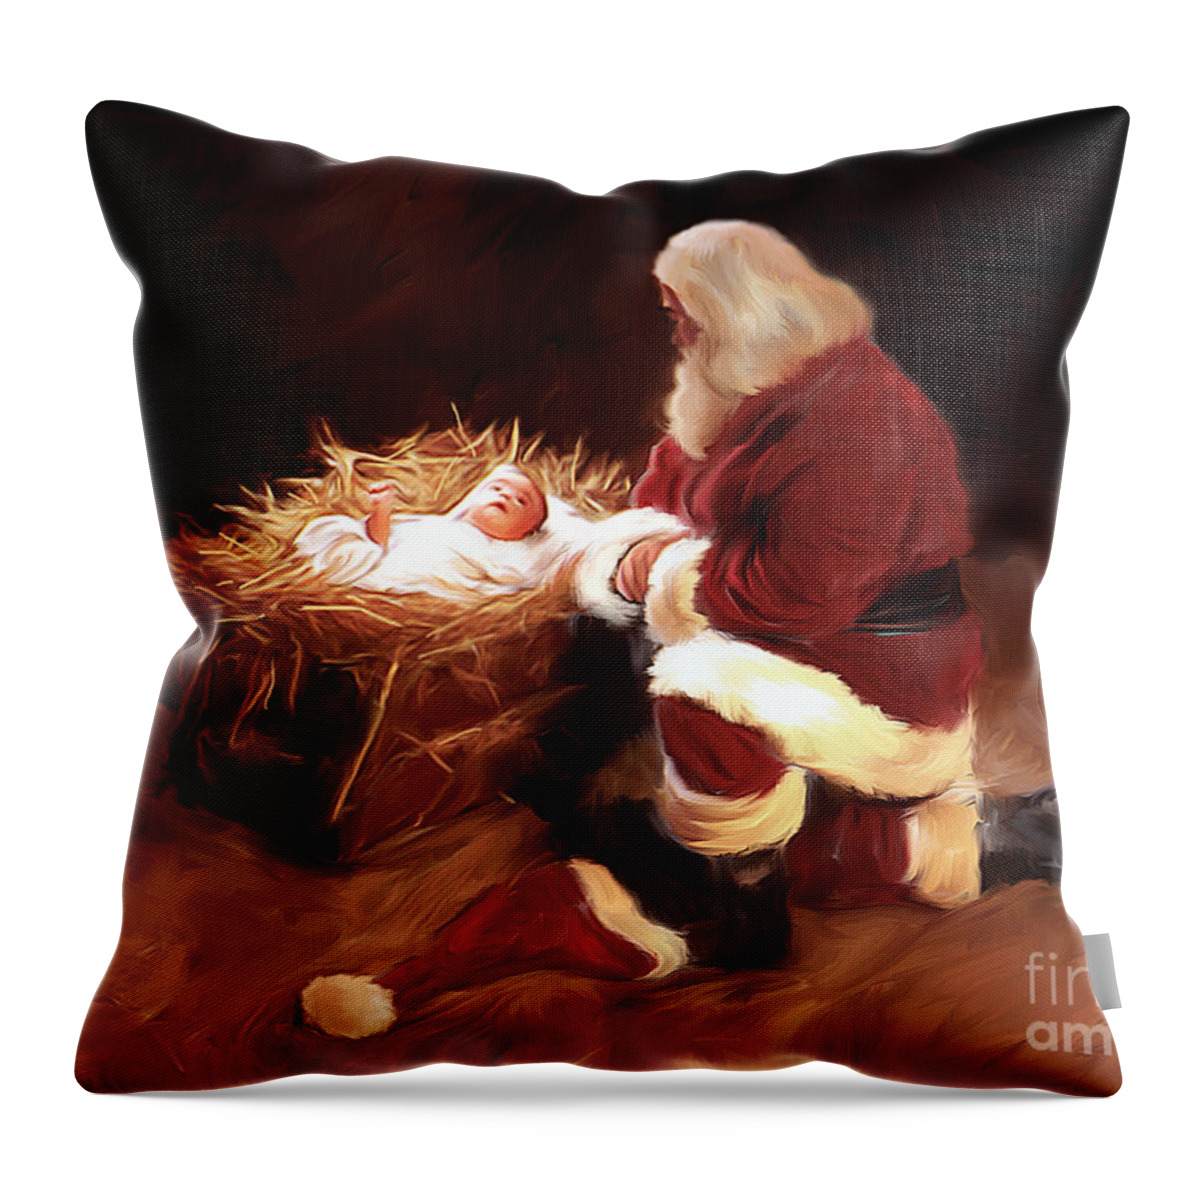 Santa Throw Pillow featuring the painting First Christmas by Mark Spears